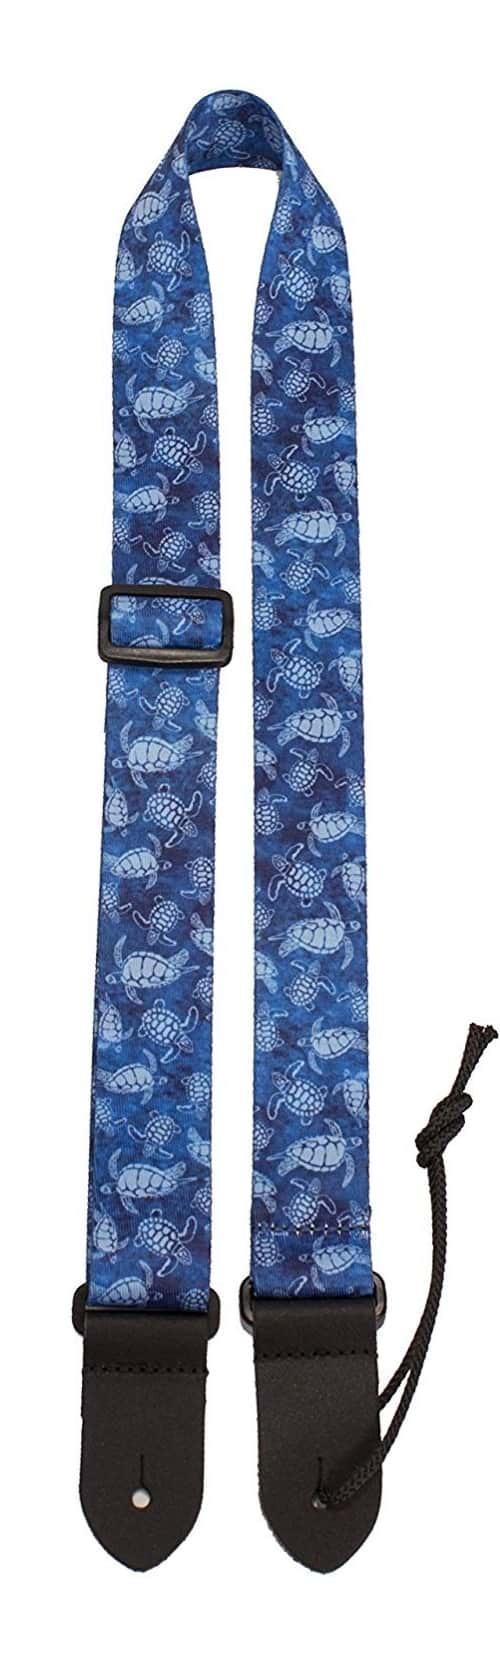 Perri's 1.5" Ukulele Strap with Leather ends - Blue Sea Turtles design Polyester